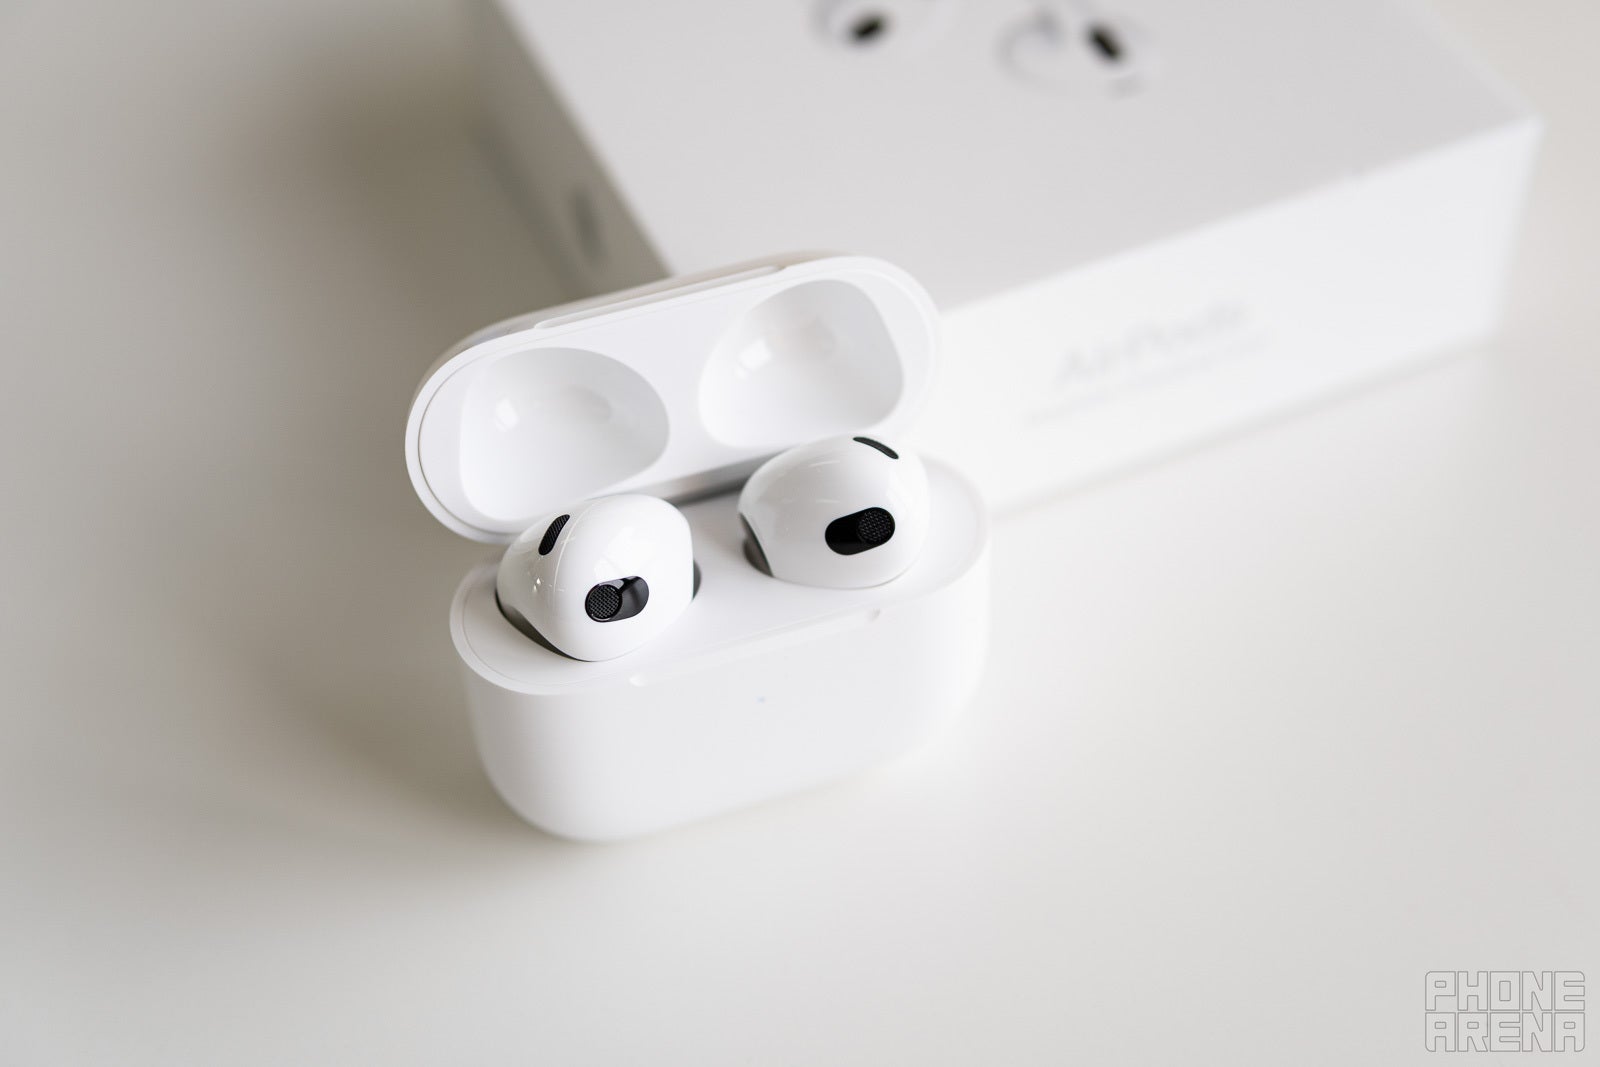 Apple AirPods 3 review: Spatial audio steals the show